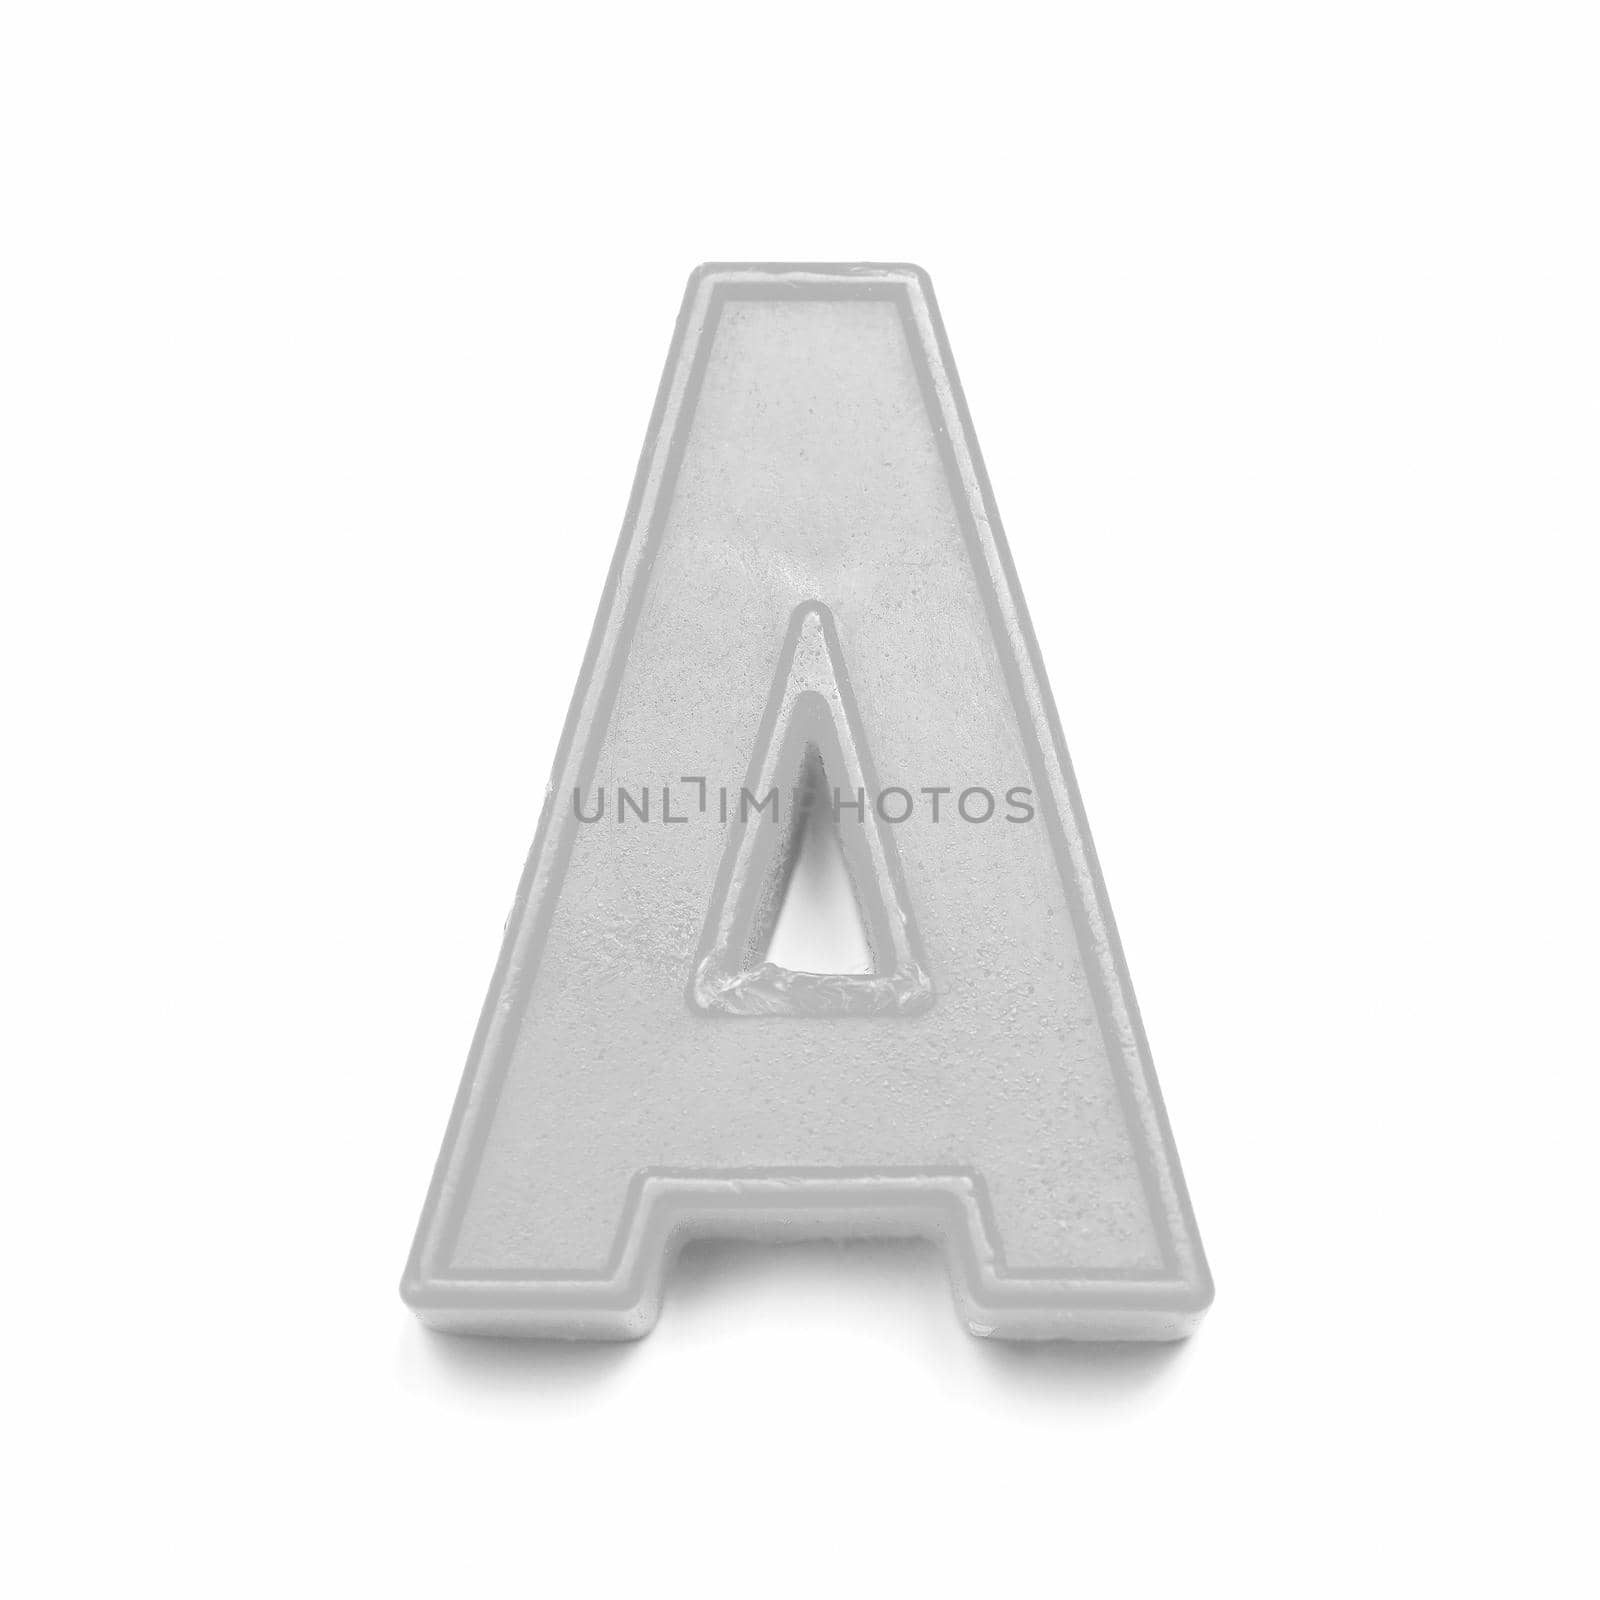 Magnetic lowercase letter A of the British alphabet in black and white